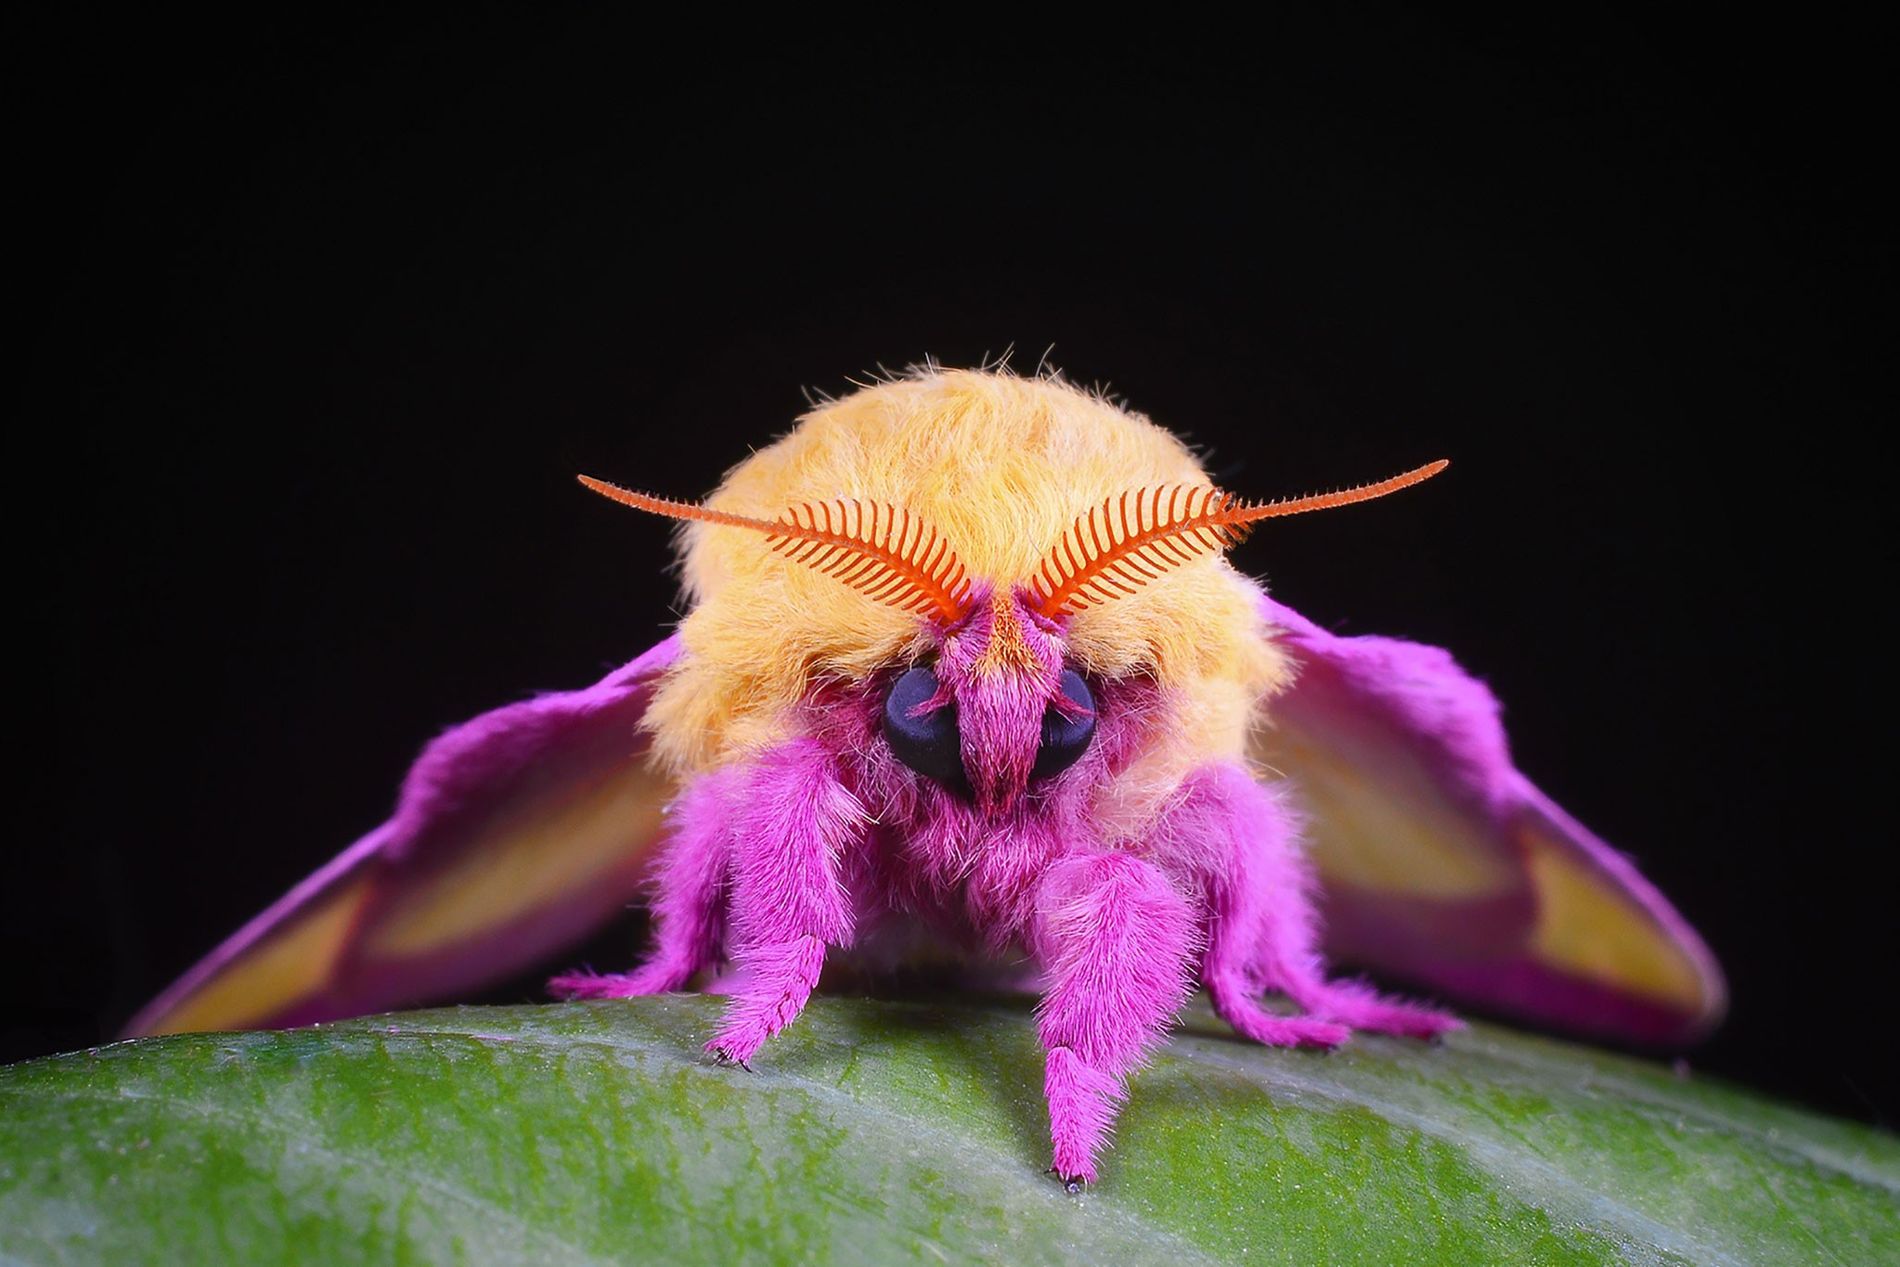 Vibrant Image of Some of Nature's Most Colourful Creatures